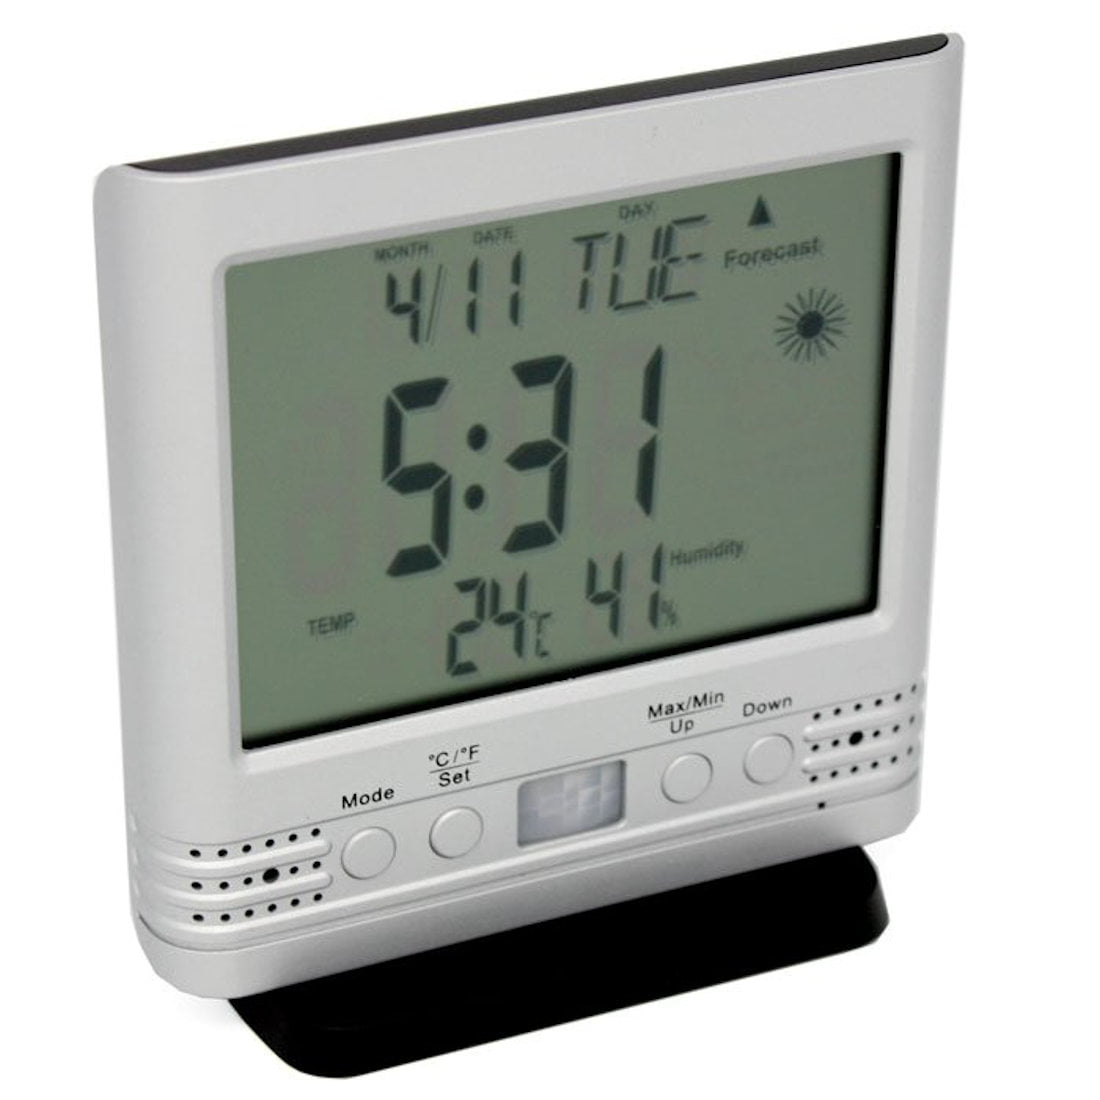 KJB Security Products DVR2561 Weather Clock with Covert Camera